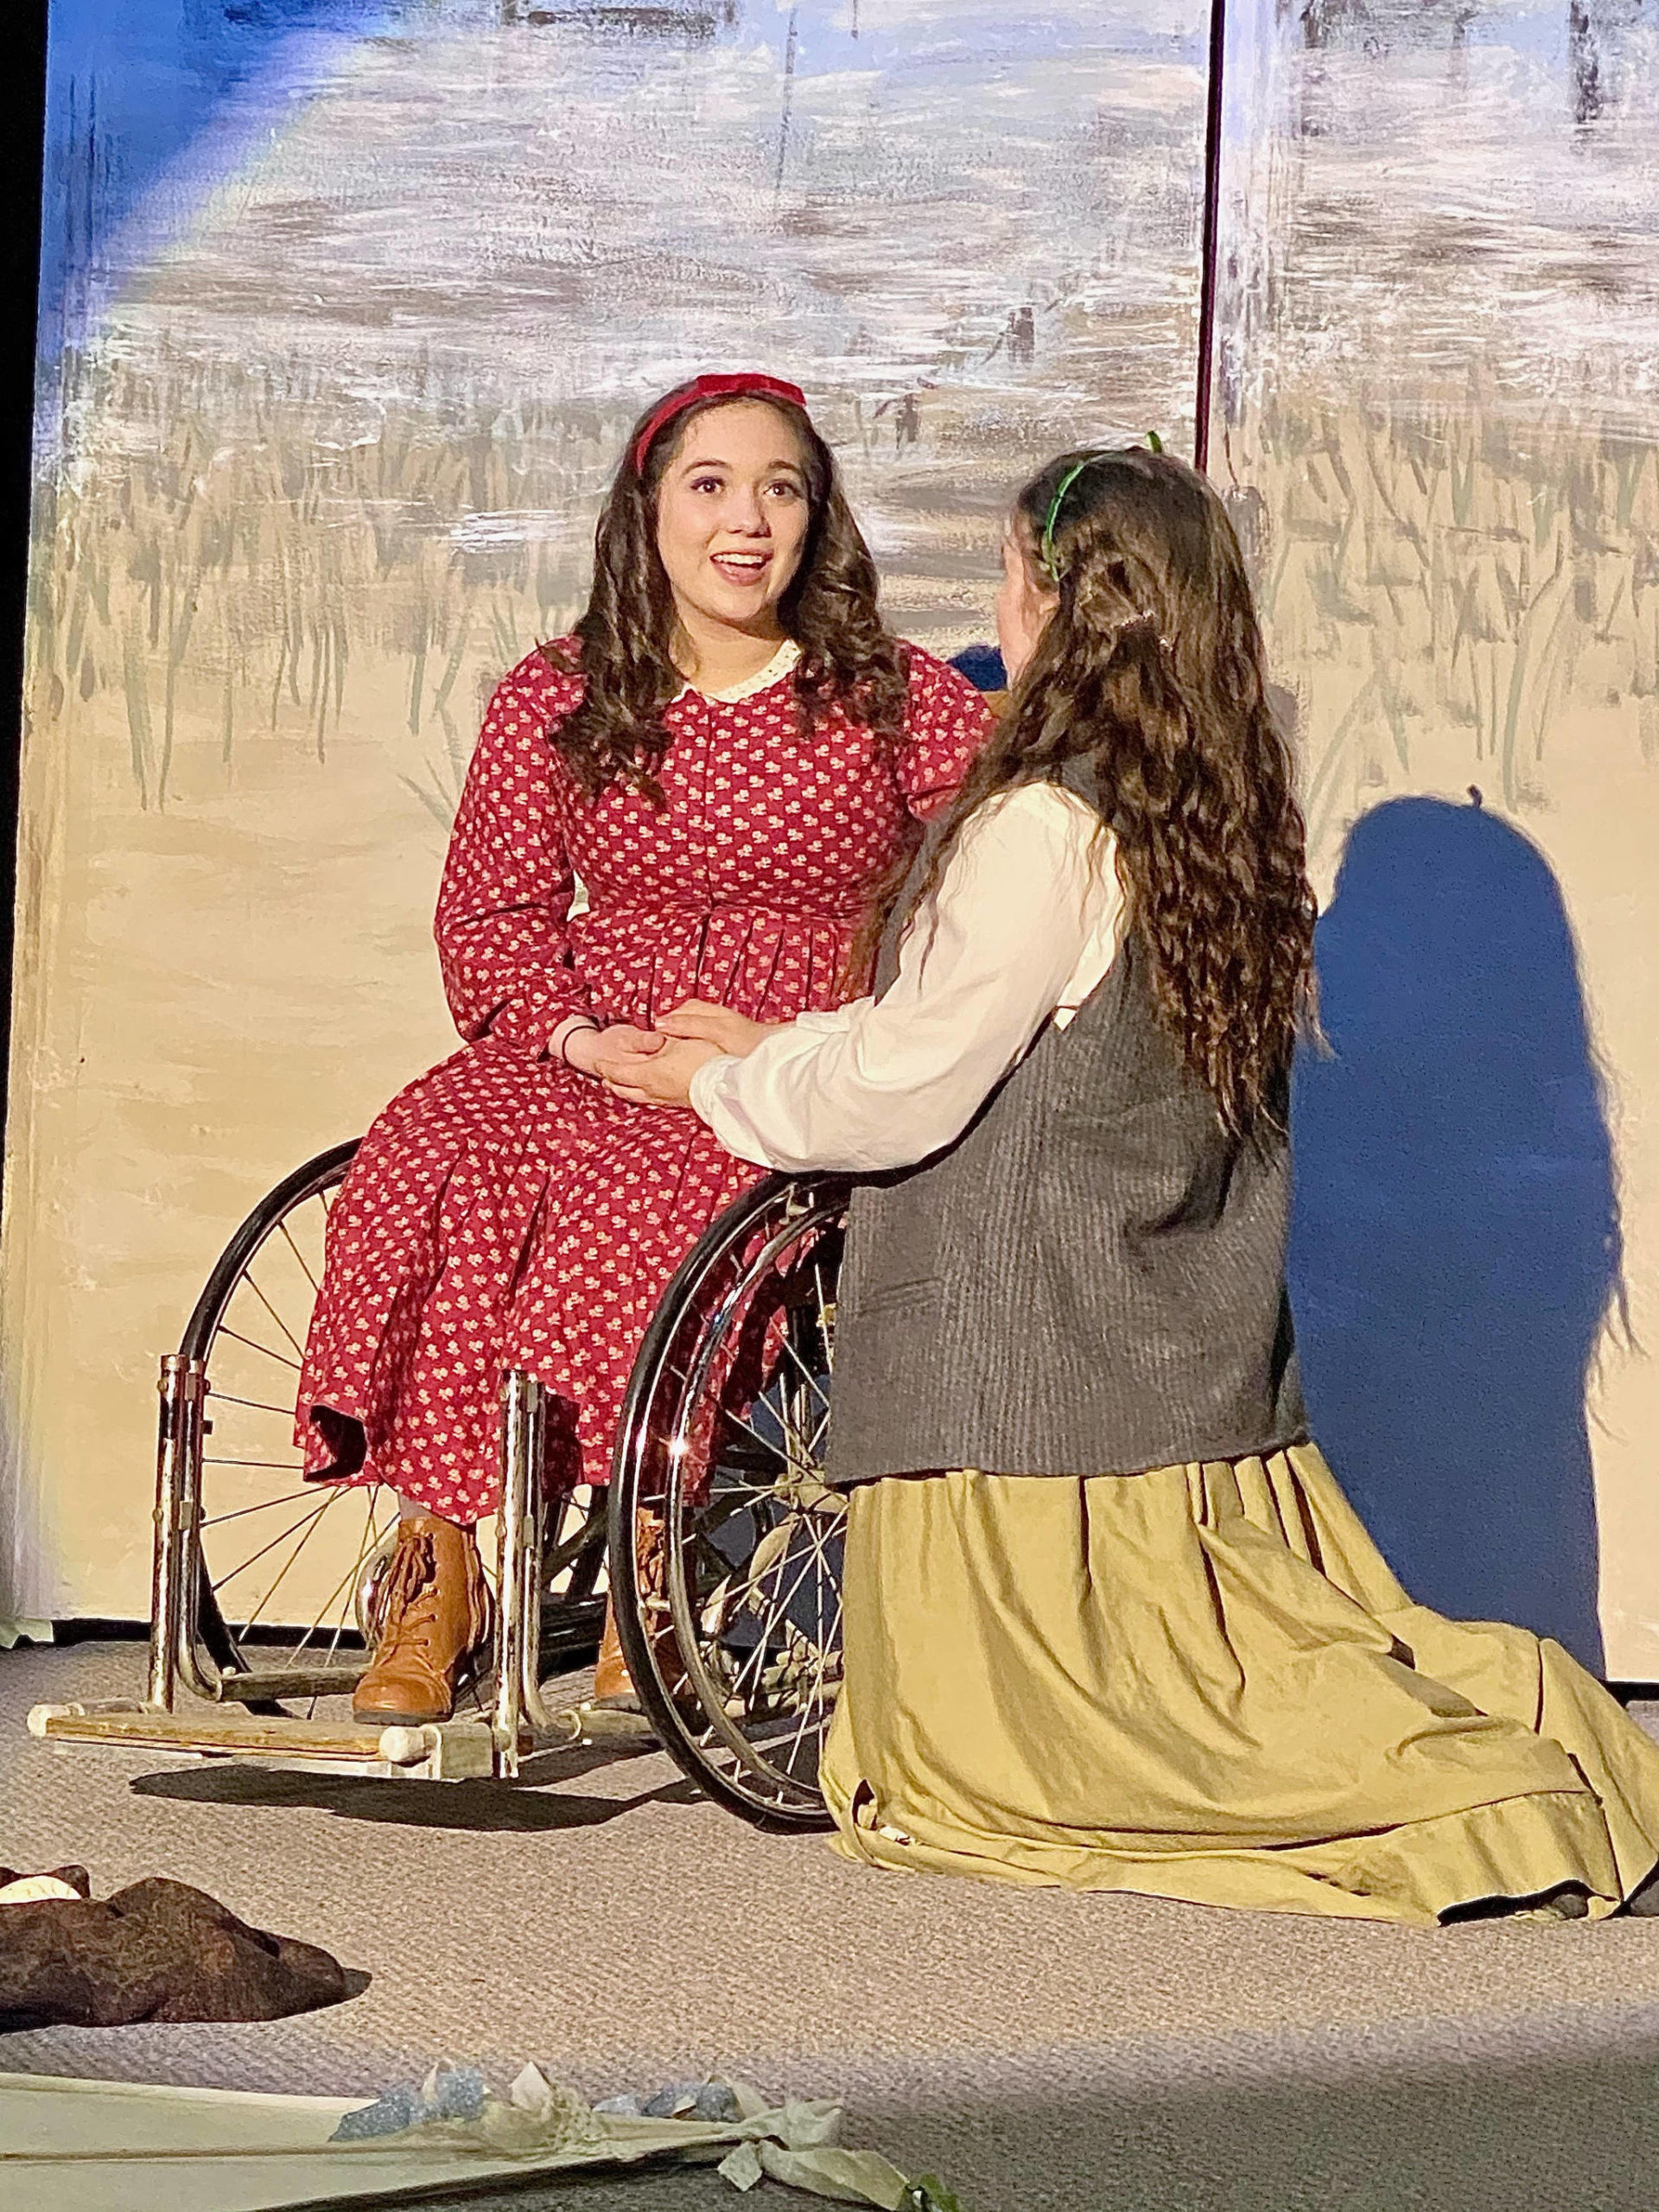 Jayni Parish (left) and Brittany Gilman act onstage as their characters Beth and Jo March in the Kenai Performers’ production of “Little Women,” which premieres on Thursday, May 20, 2021. (Photo provided)